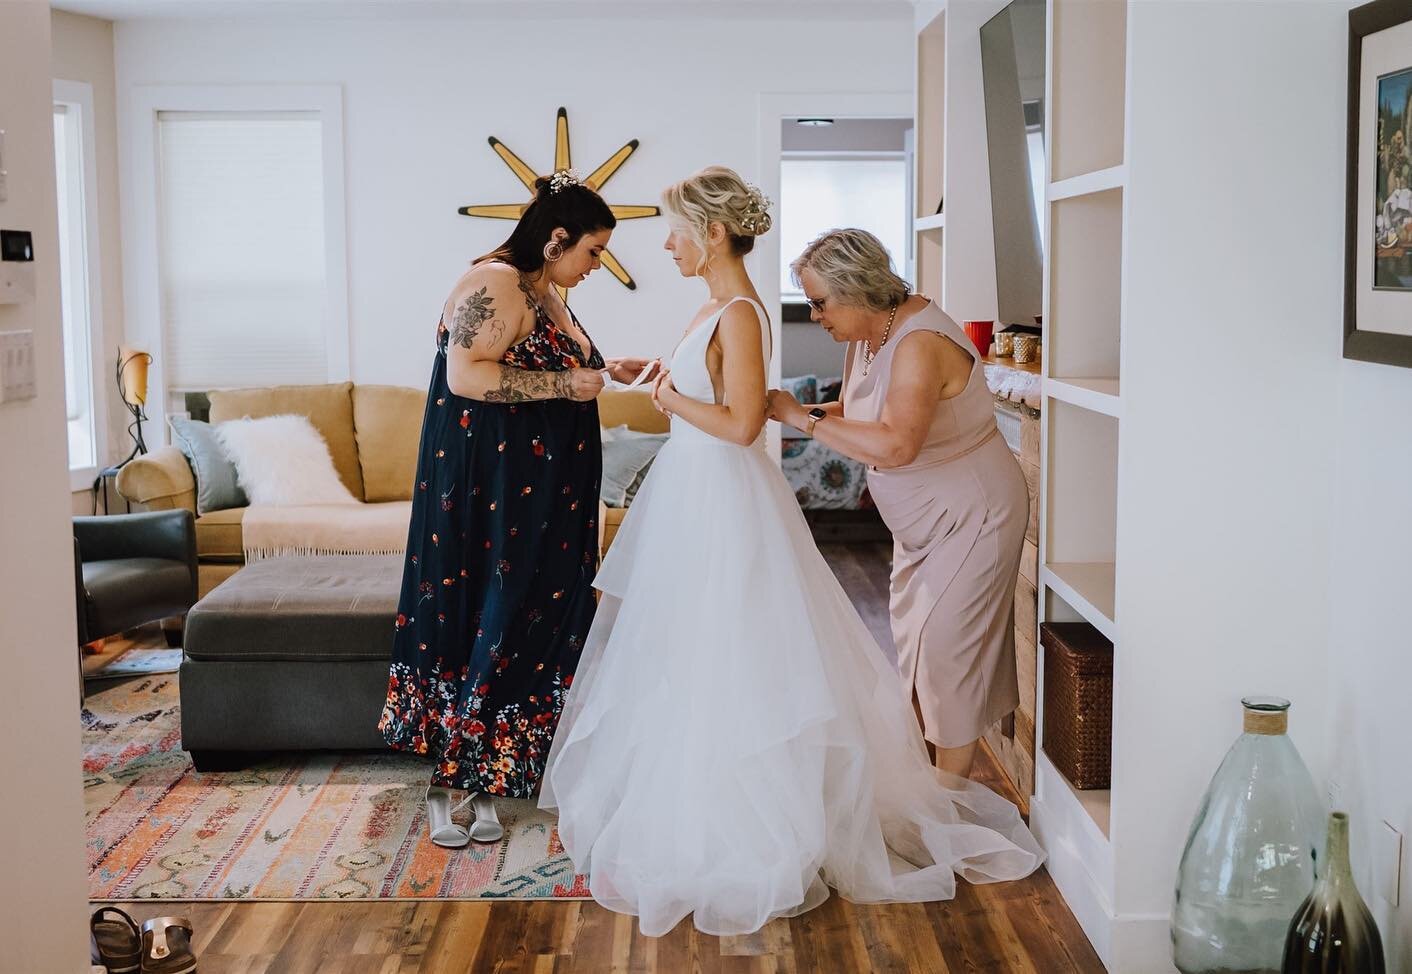 Getting ready photos might not seem important to every couple, but I do think some of the best moments and connections are captured during this time! All I need is an hour pre-ceremony to capture the laughs and tears of your favourite people helping 